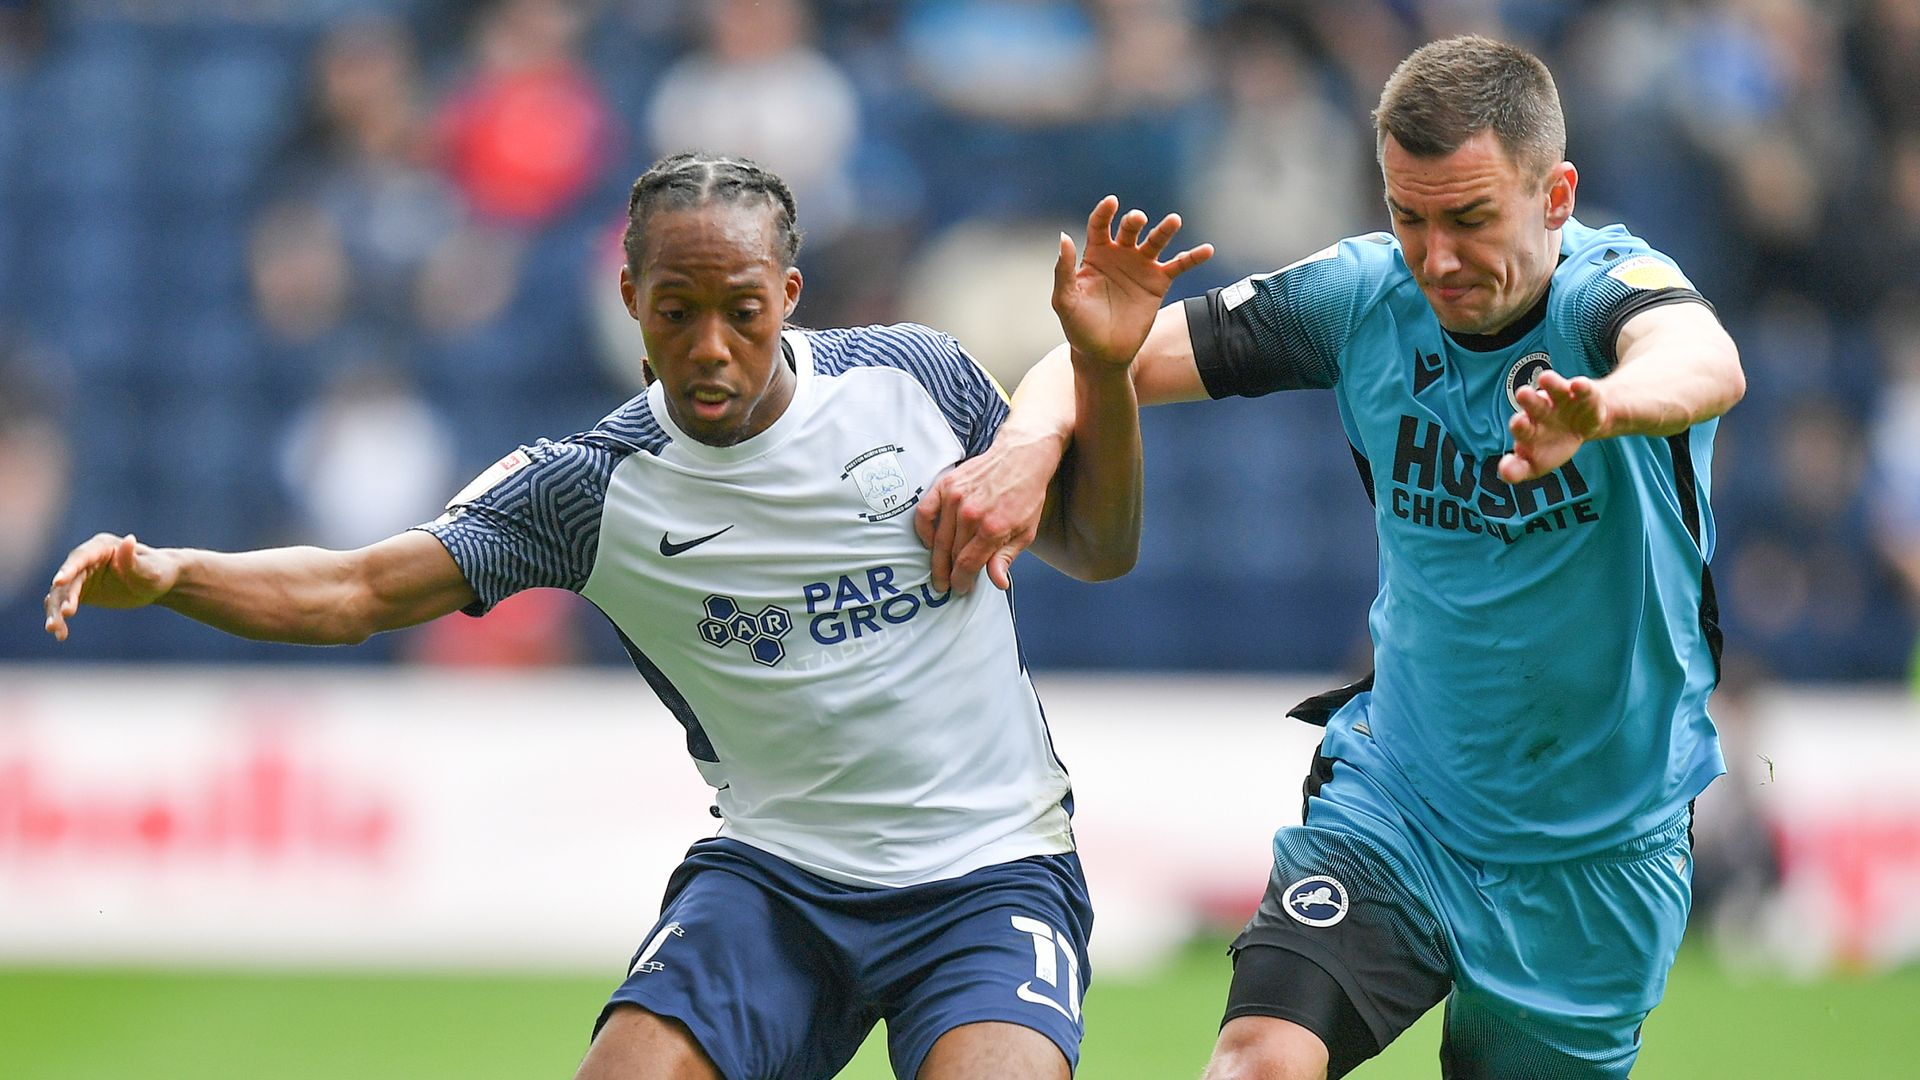 Wallace nets at both ends in Deepdale draw